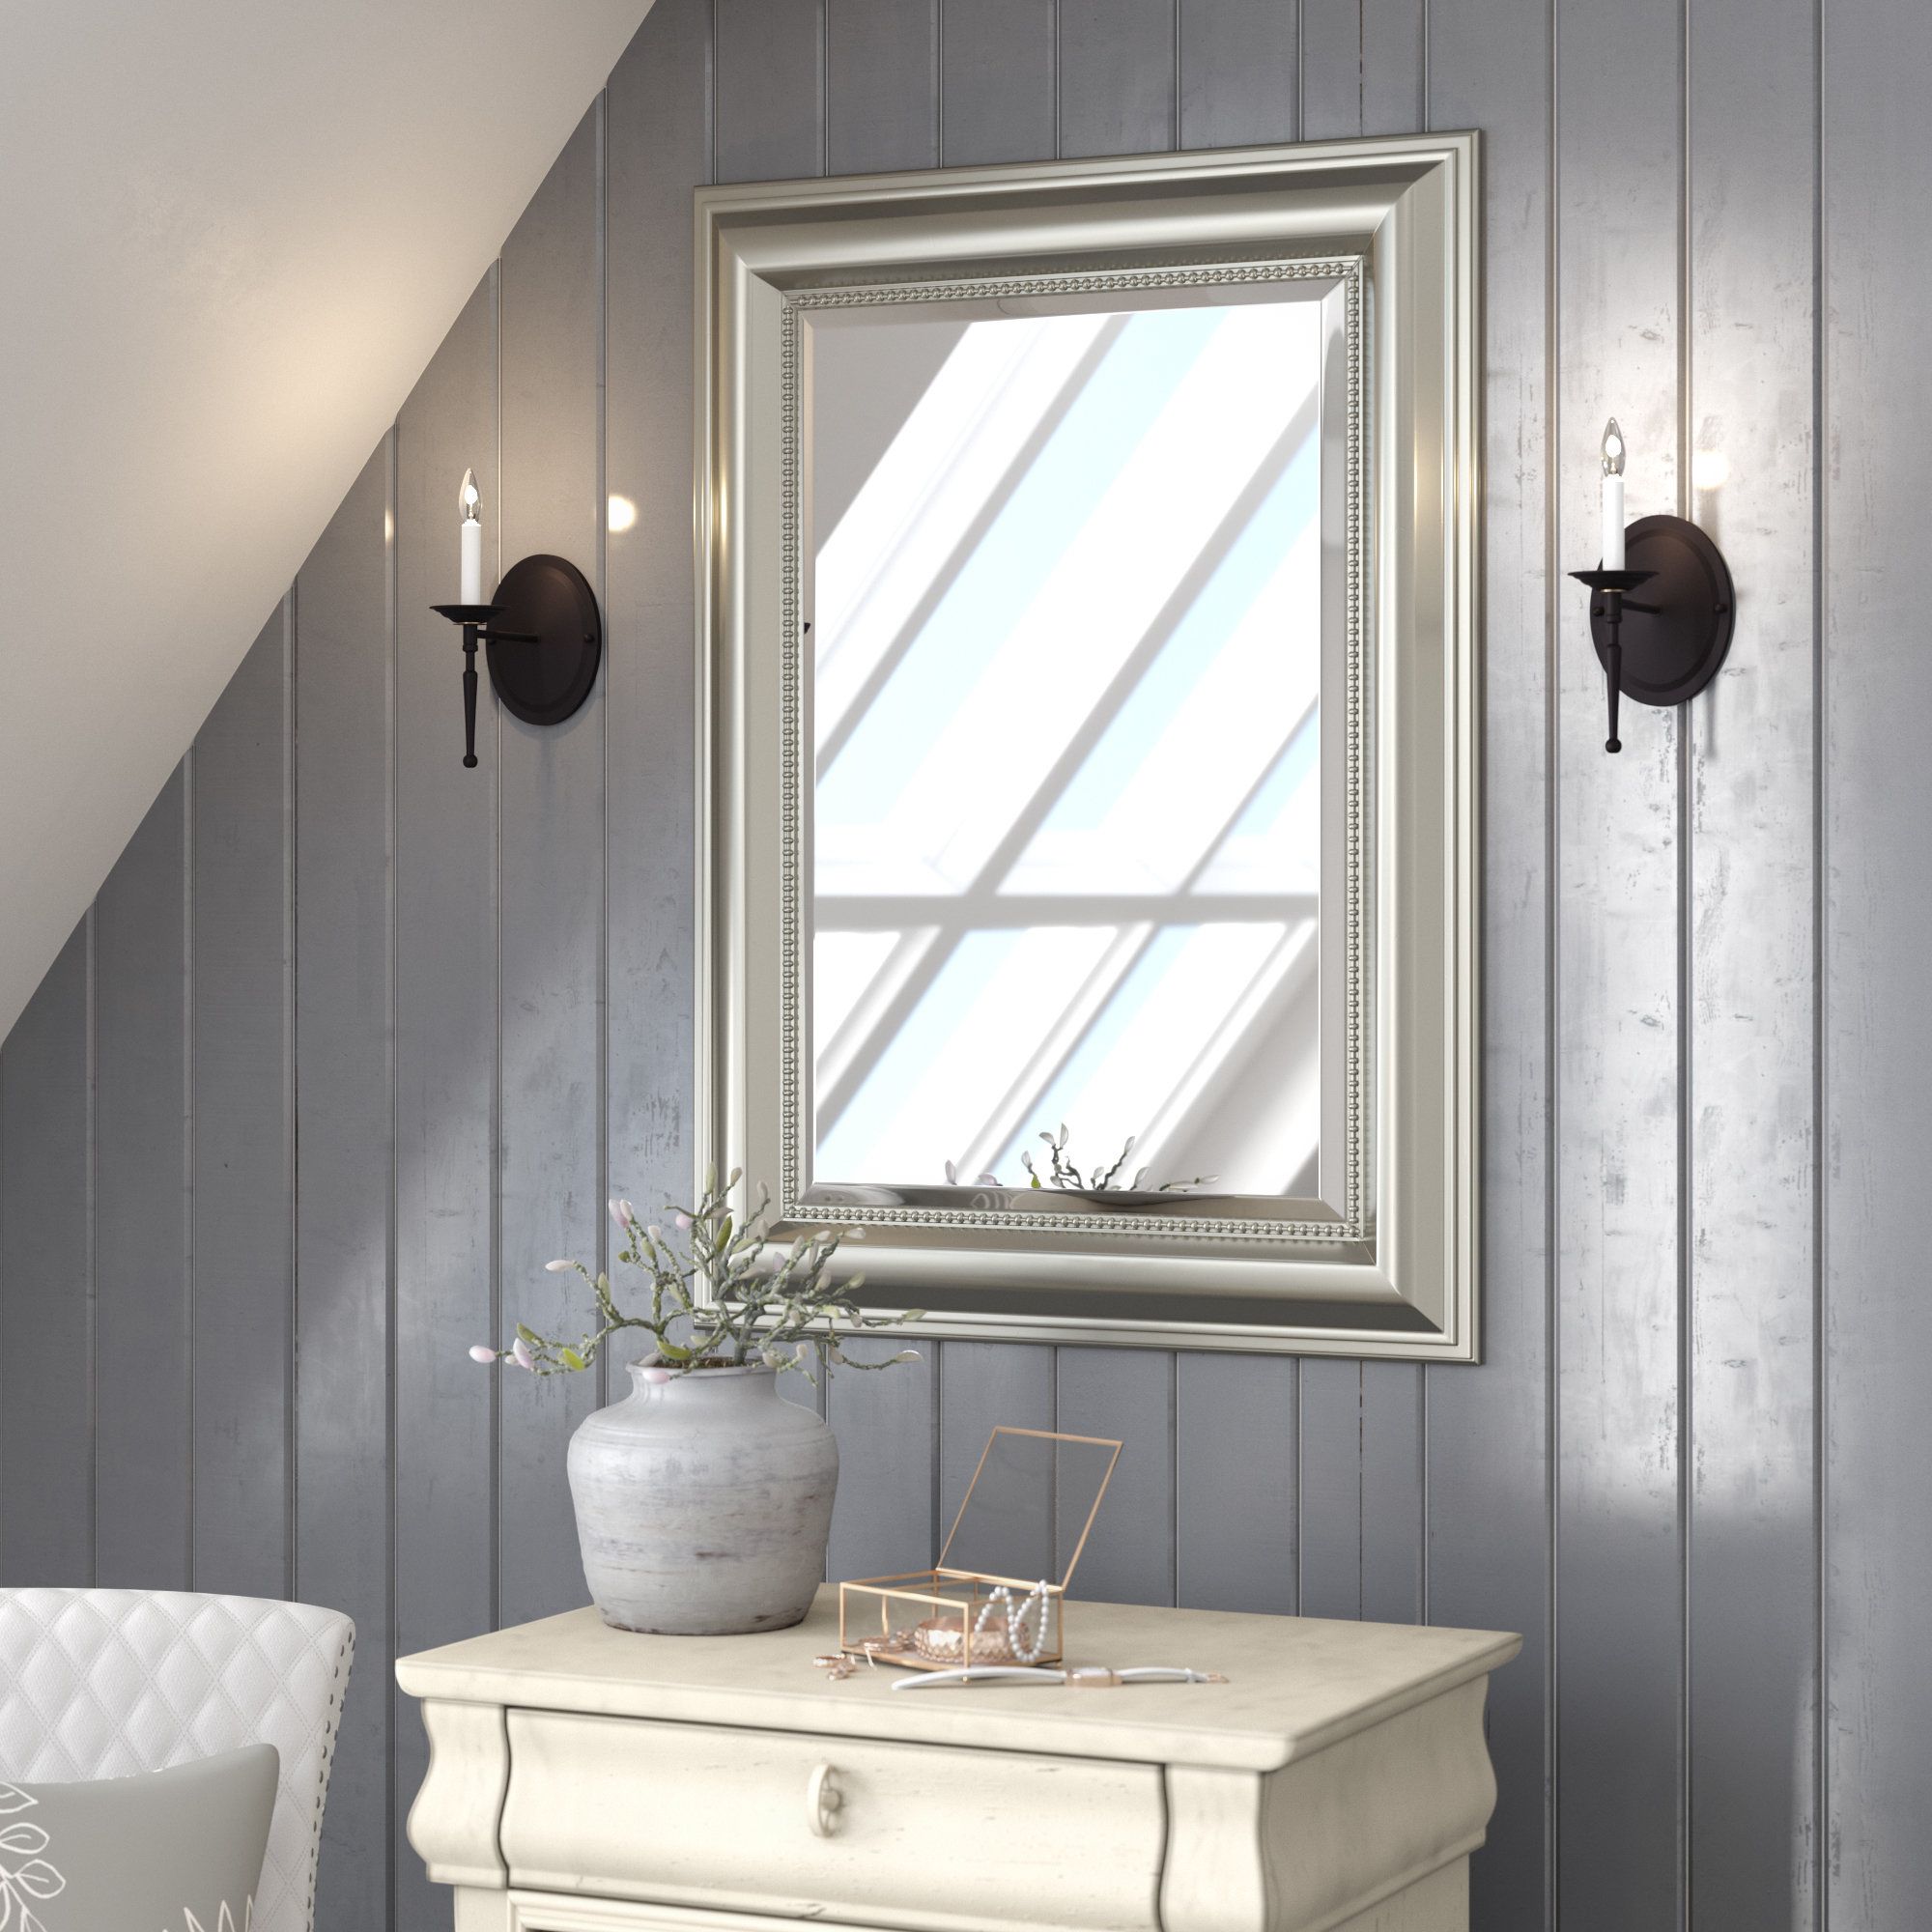 Darby Home Co Owens Accent Mirror & Reviews | Wayfair With Regard To Owens Accent Mirrors (View 3 of 20)